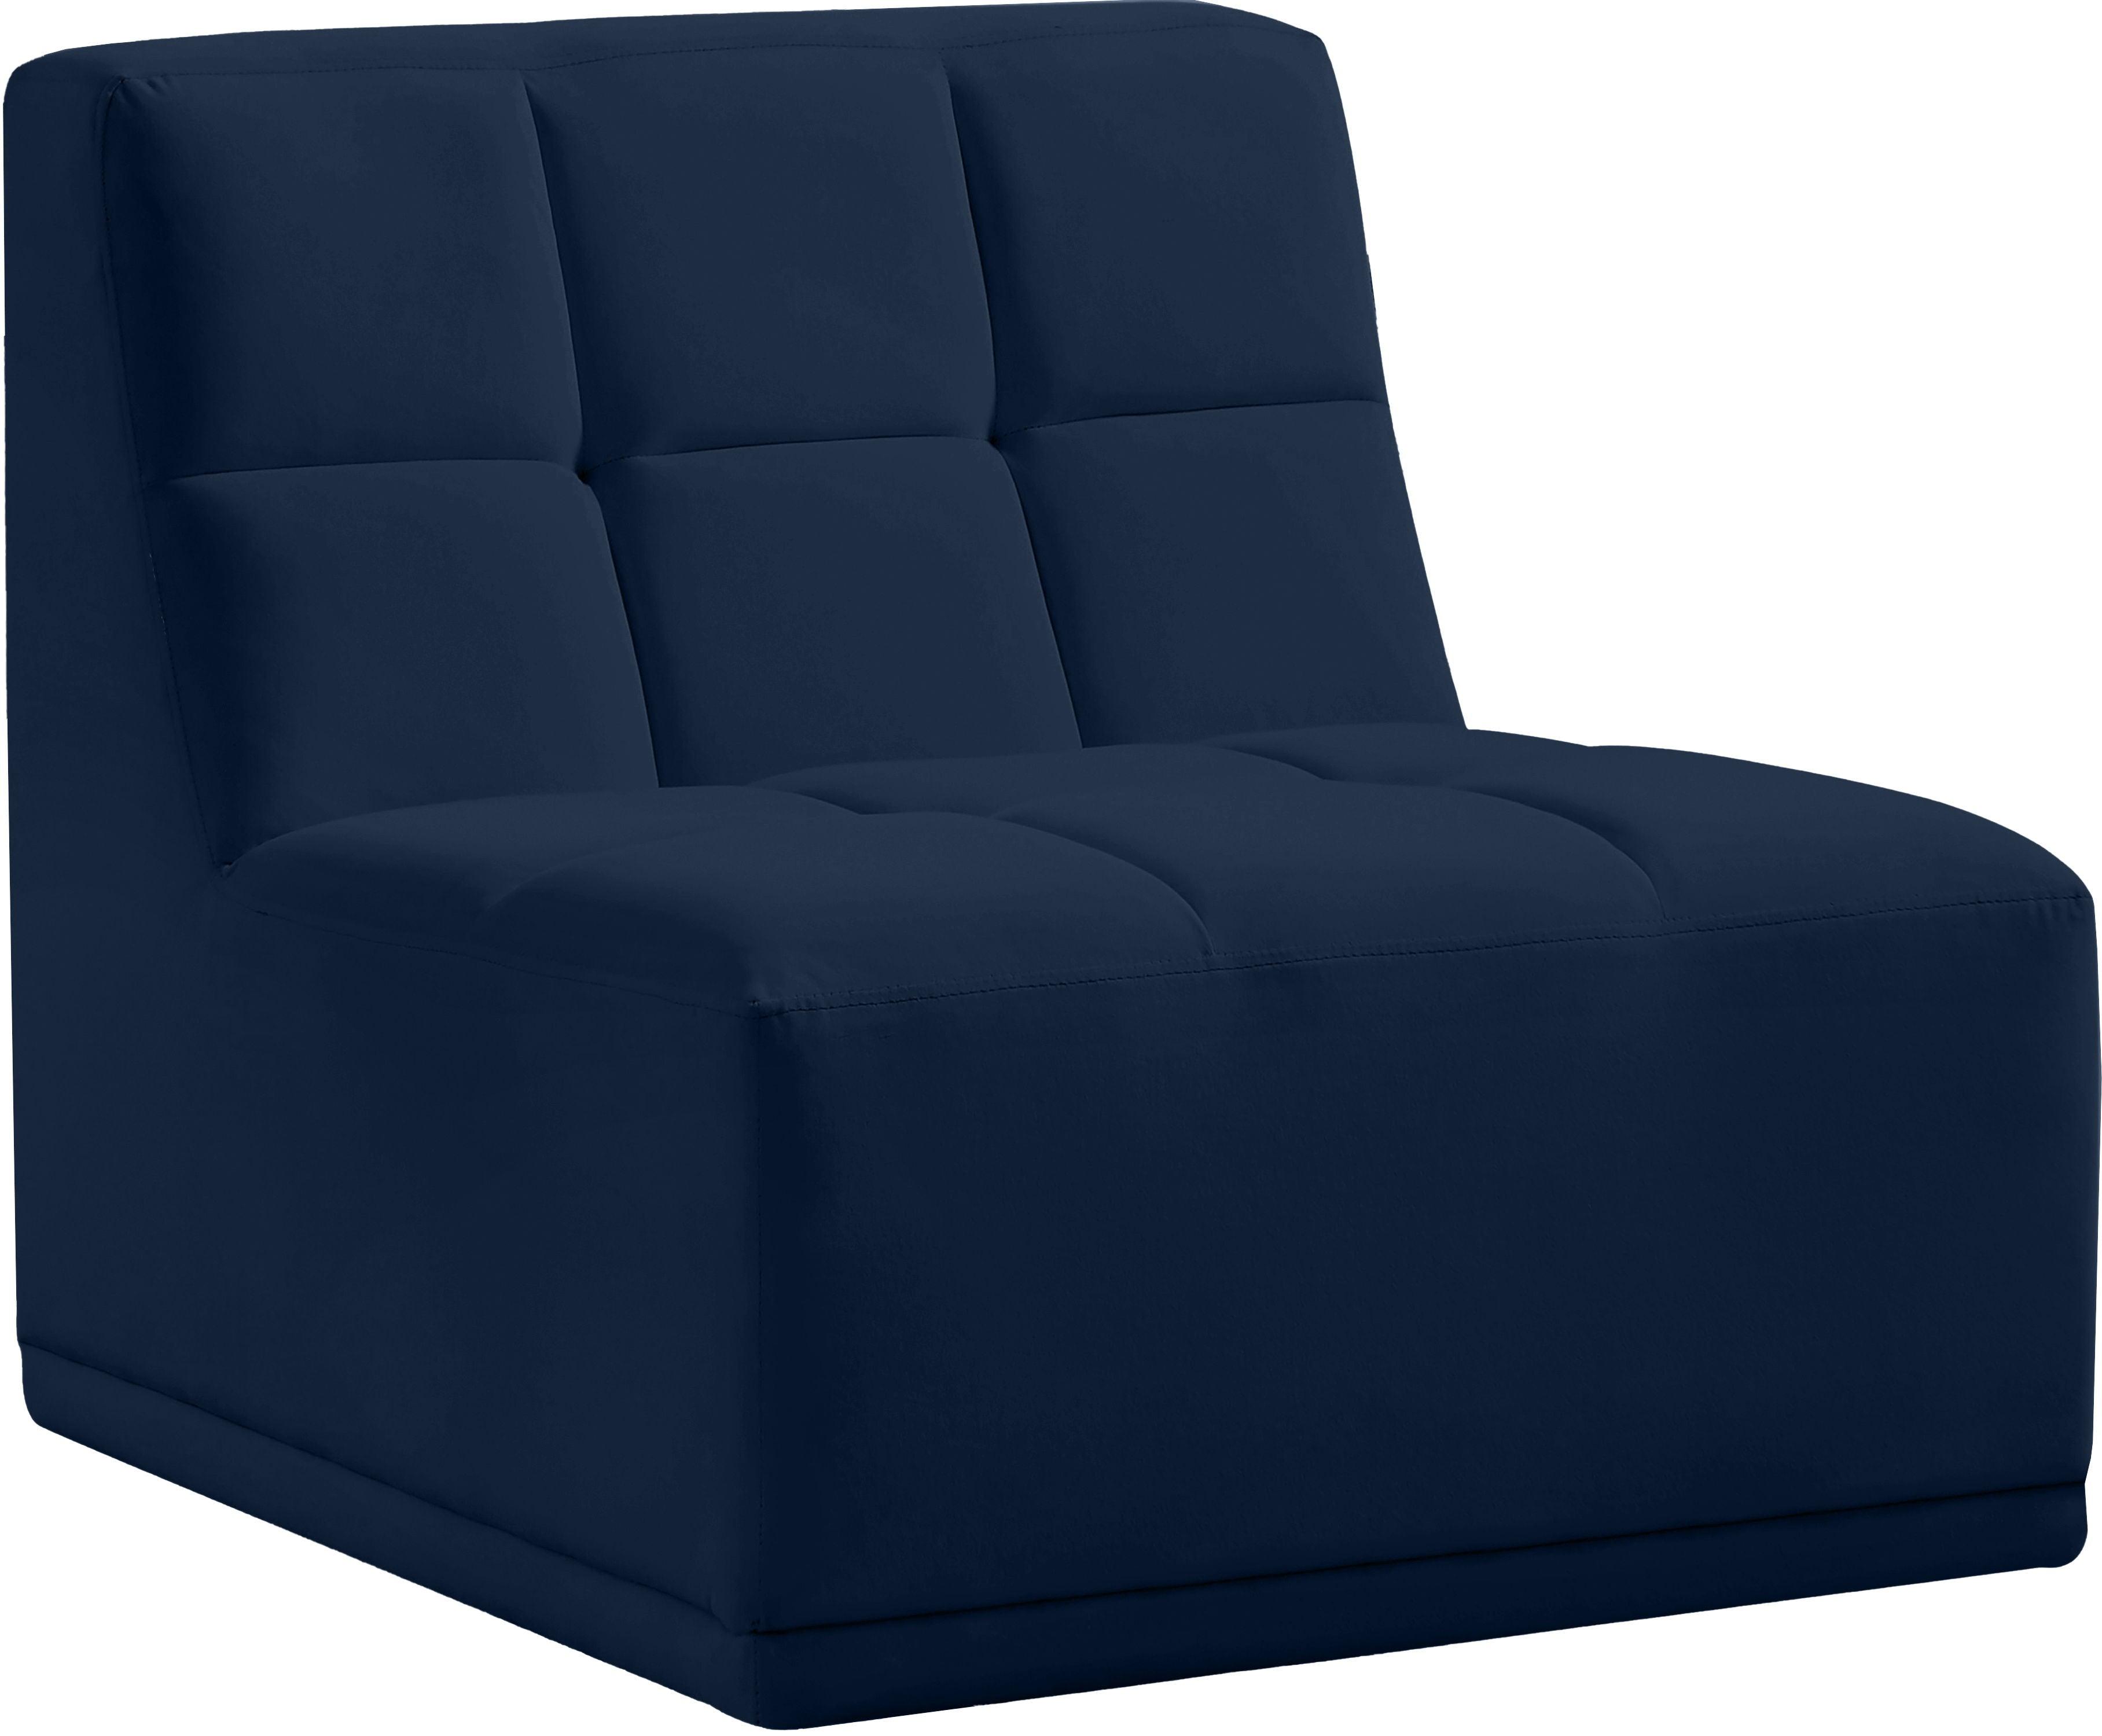 Meridian Furniture - Relax - Armless Chair - Navy - 5th Avenue Furniture